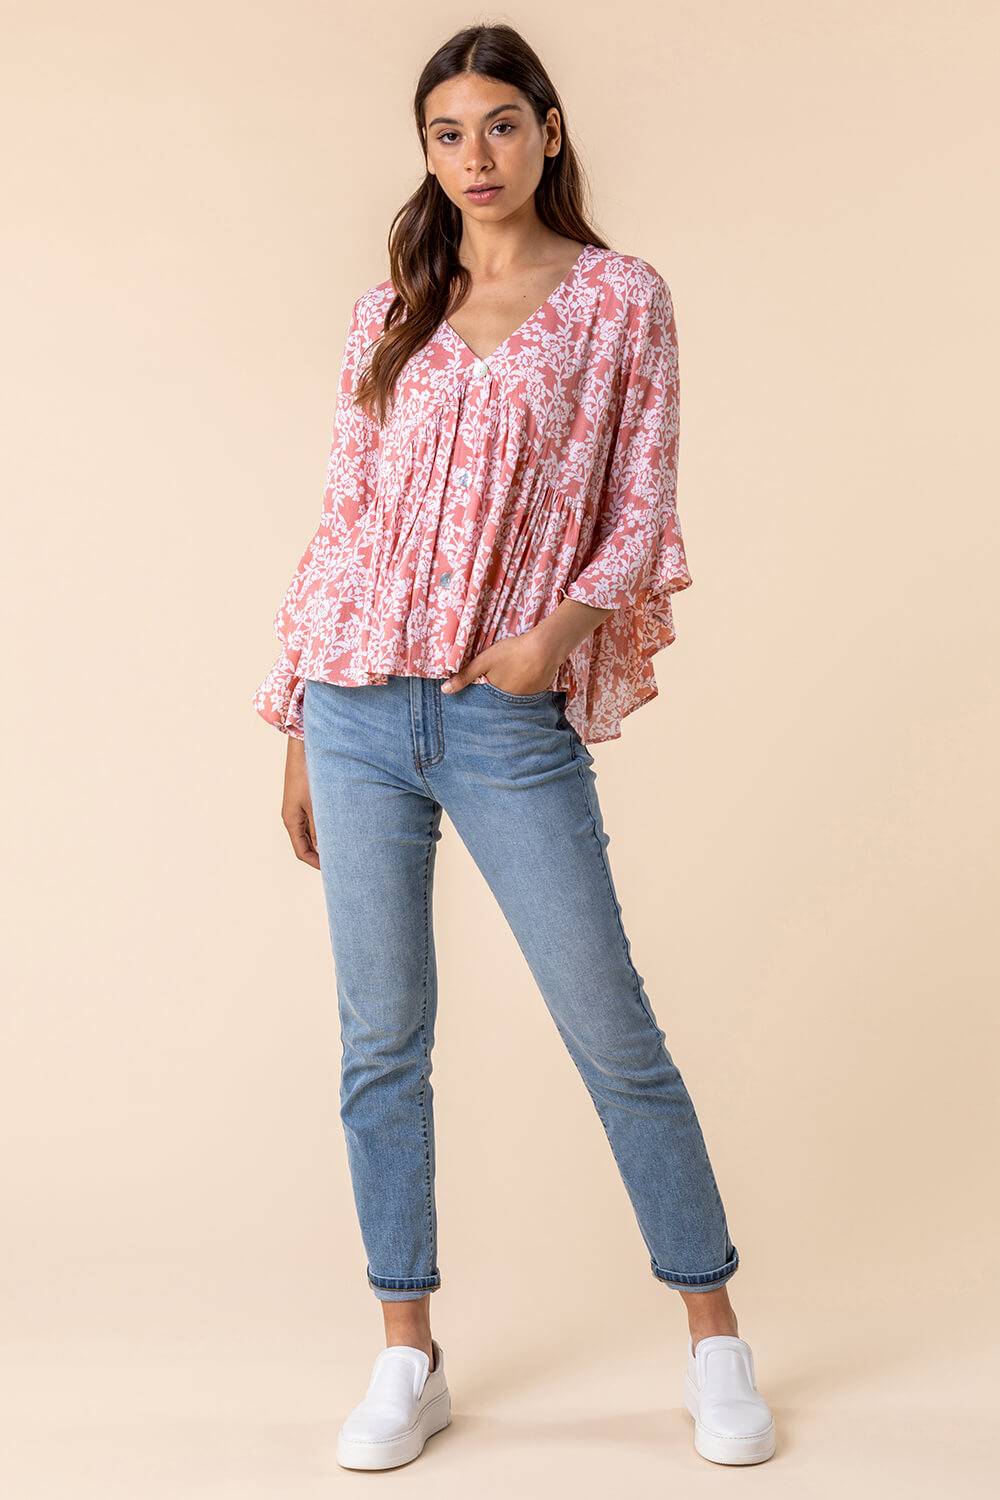 PINK Floral Print Frill Detail Blouse, Image 3 of 4